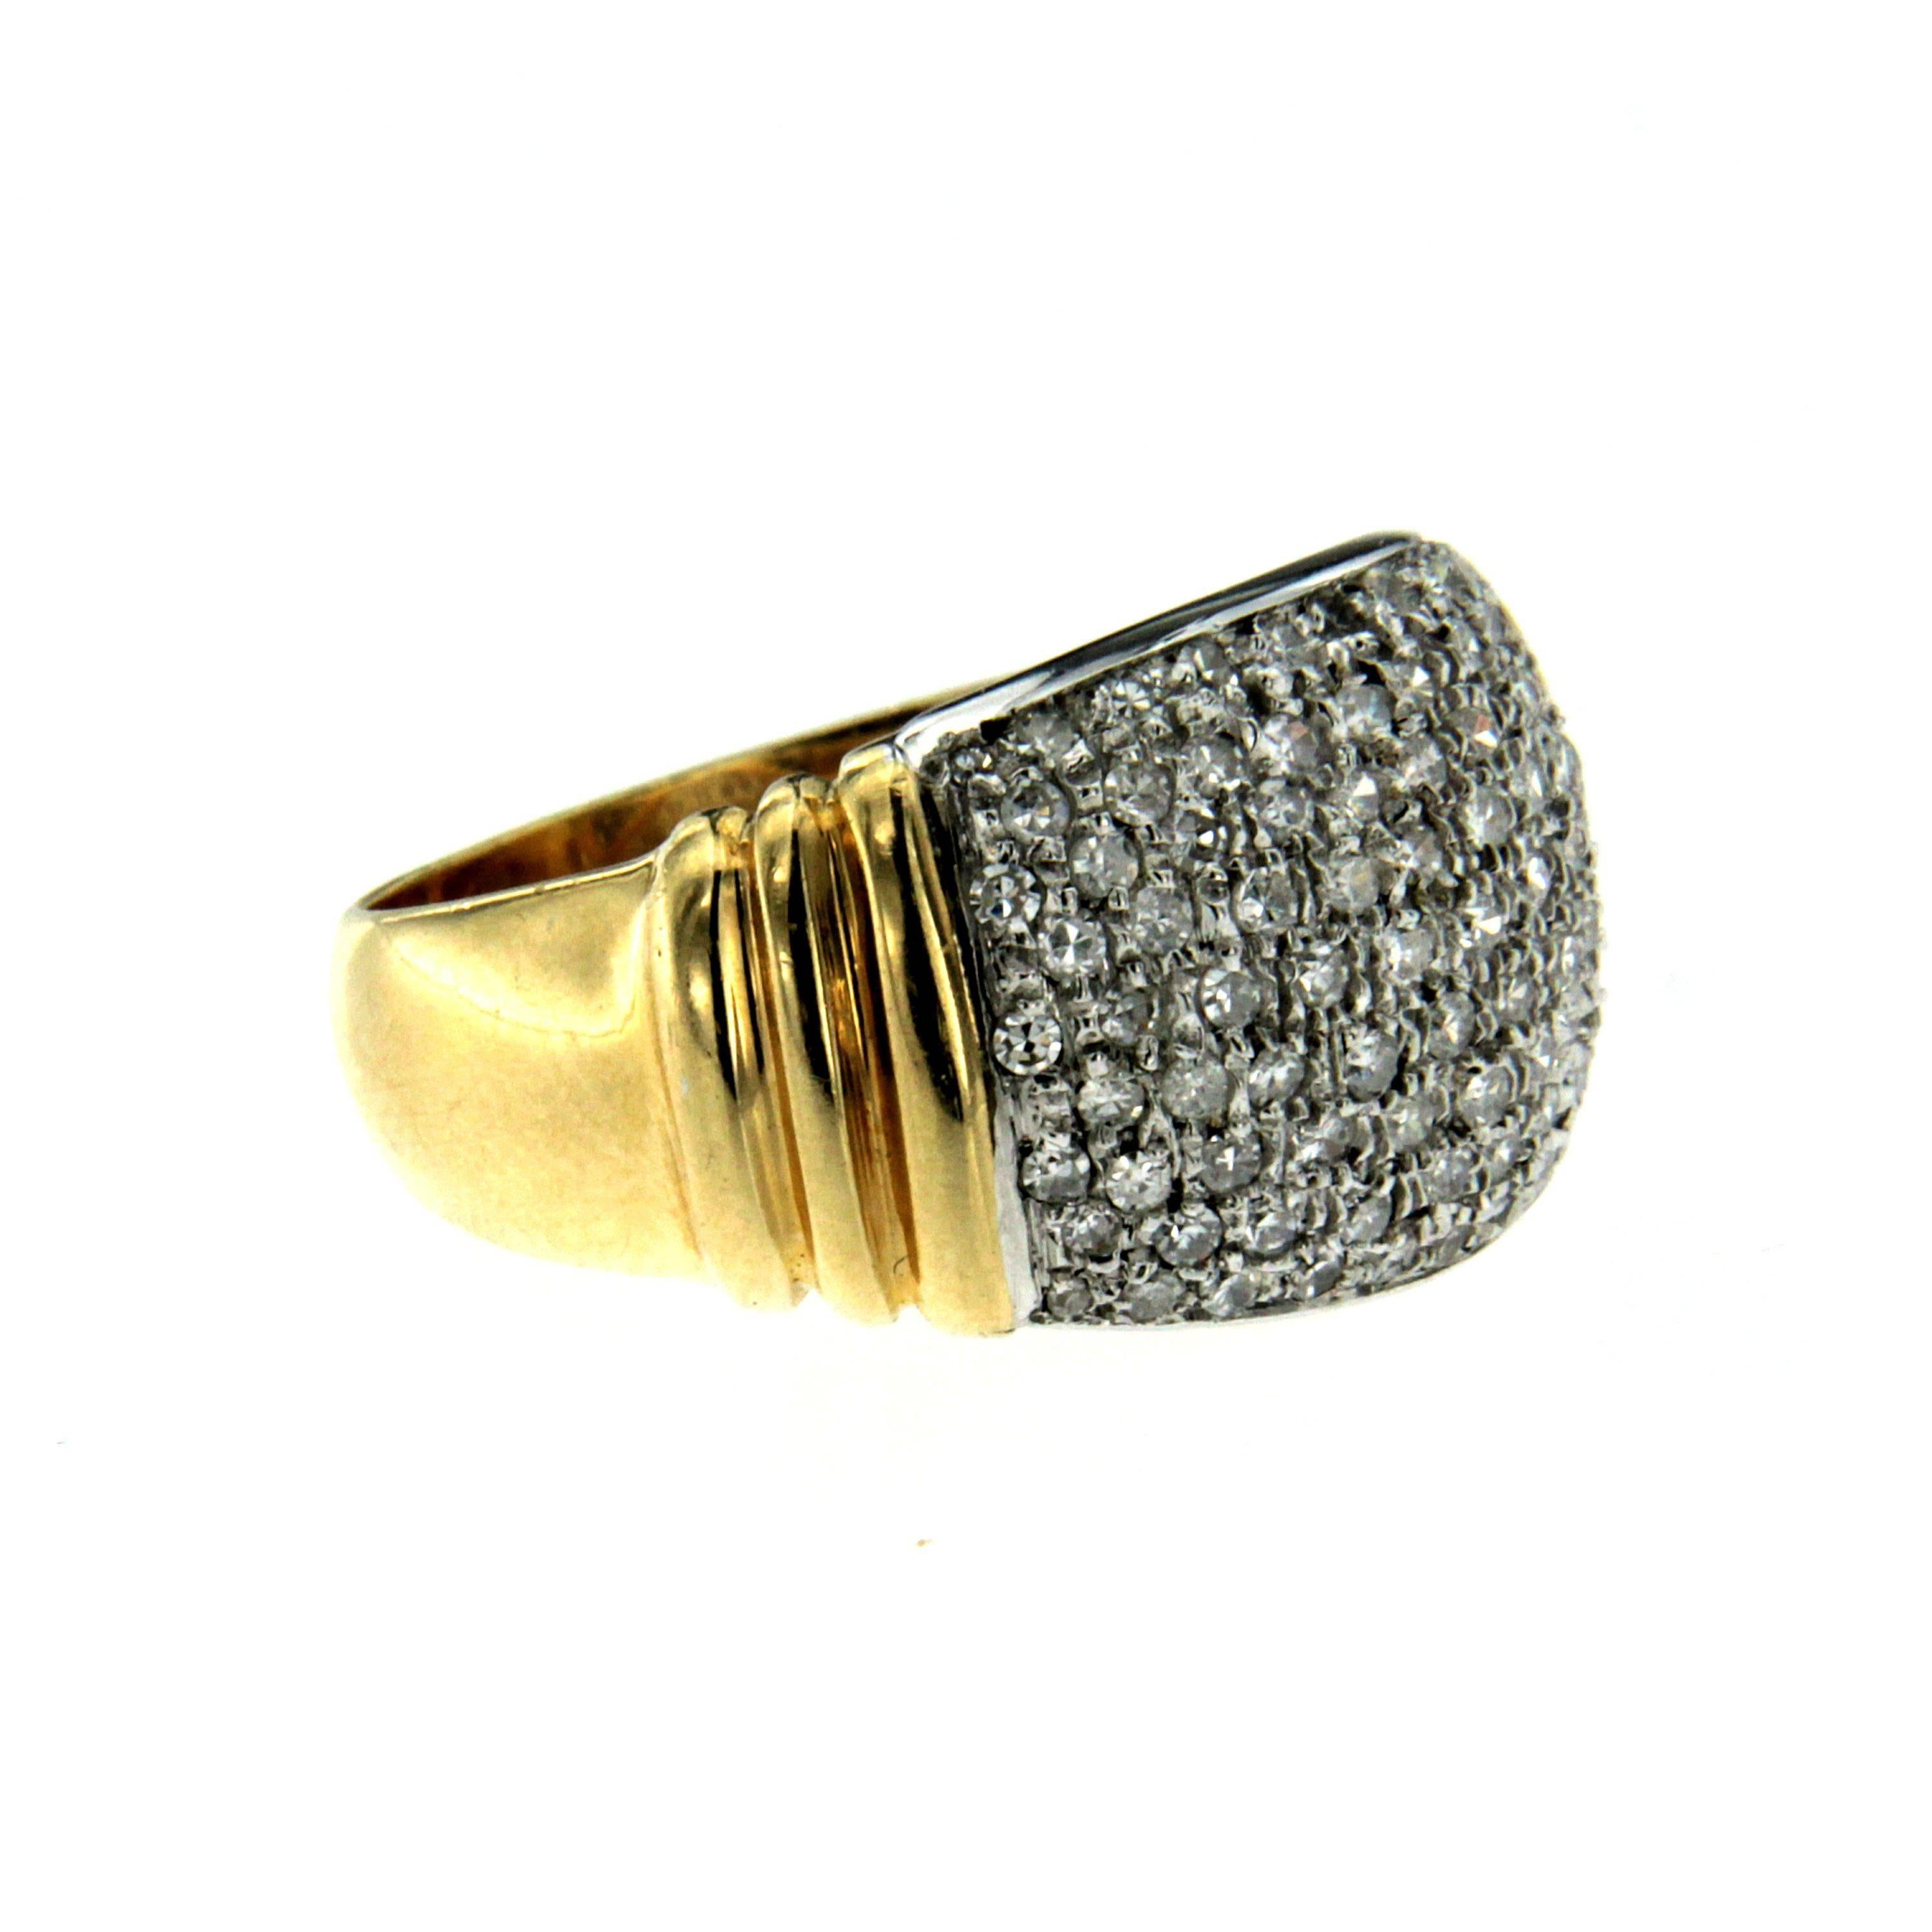 A gorgeous cocktail ring handcrafted in 18k yellow gold set with huit huit cut pave diamonds G color weighing 1.00 carats. Circa 1950

CONDITION: Pre-owned - Excellent 
METAL: 18k Gold 
GEM STONE: Diamond 1.00 total carats
RING SIZE: US 8 - IT 17 -